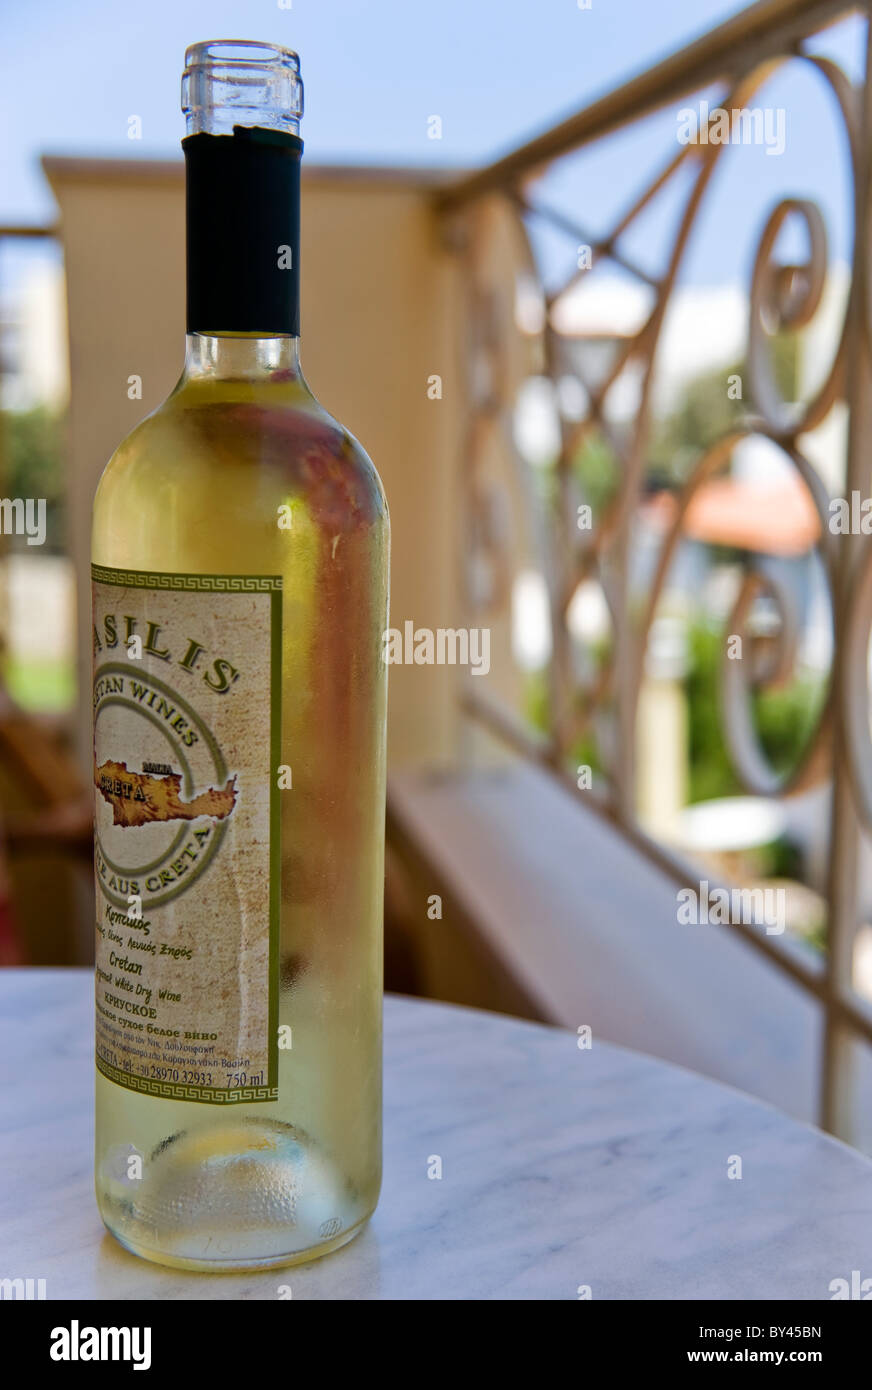 AN OPENED BOTTLE OF WHITE WINE ON A BALCONY TABLE IN CRETE Stock Photo